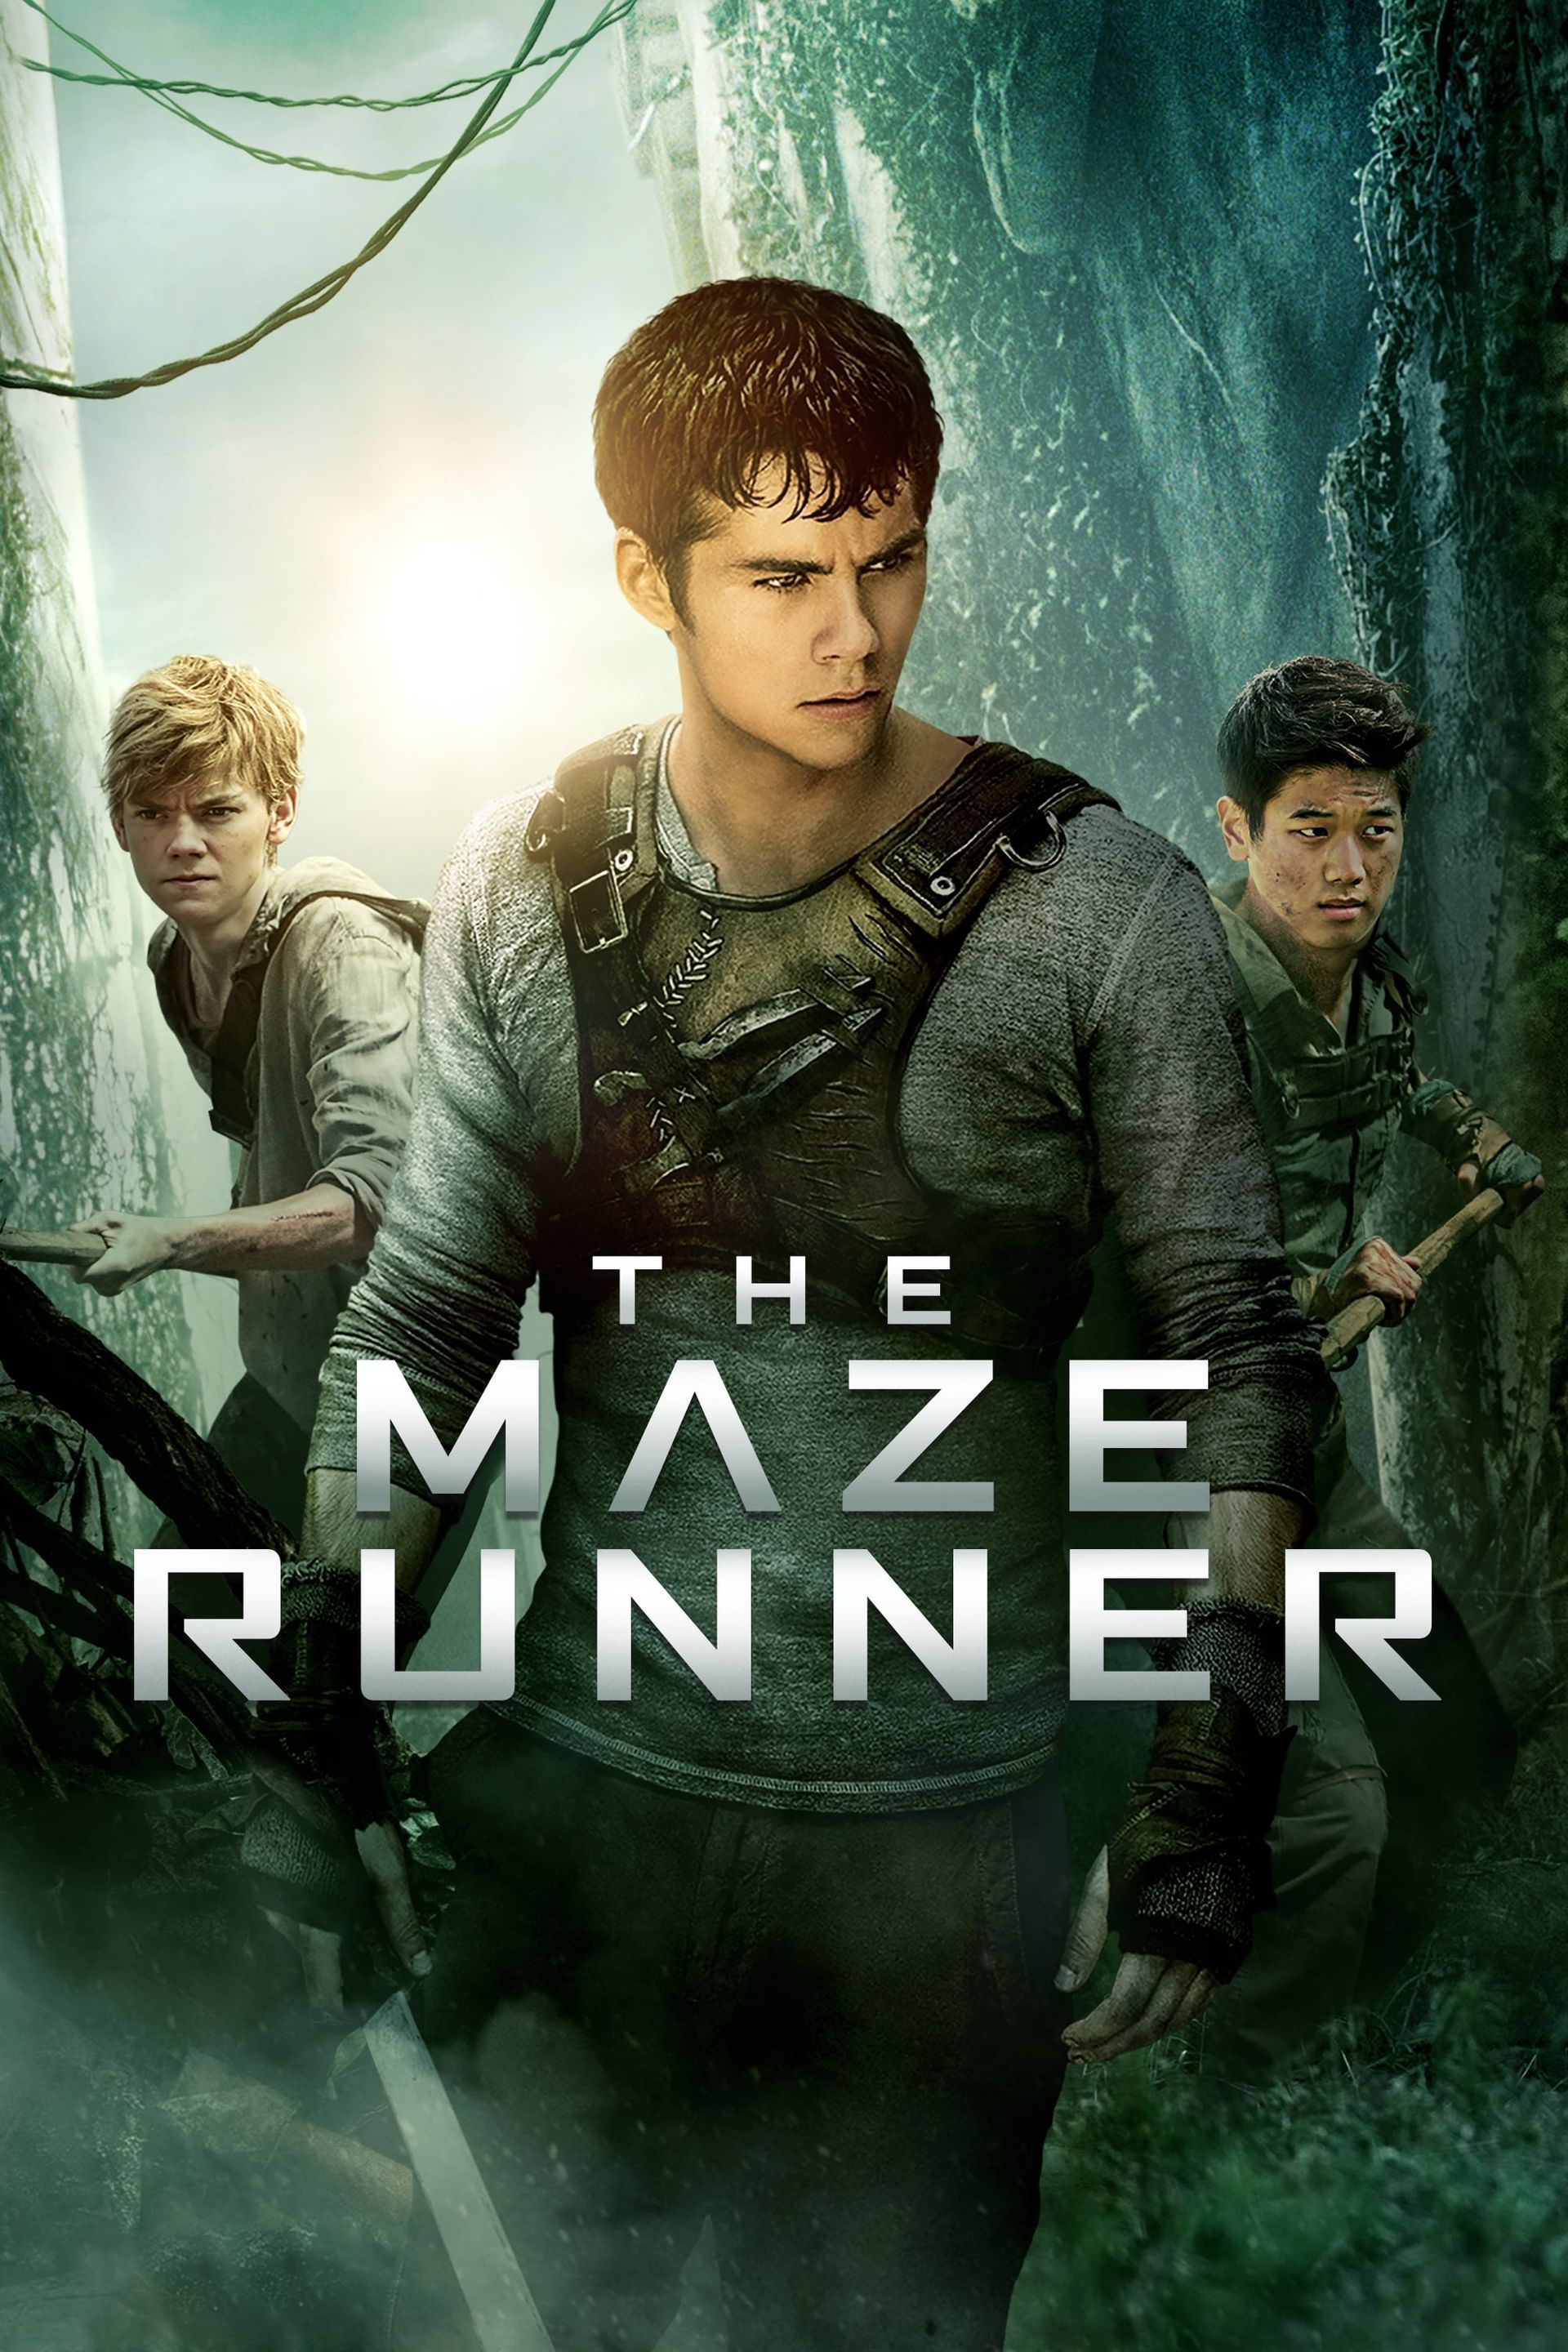 MOVIE Coming Soon: 'THE MAZE RUNNER' [2014] Watch Trailer Now